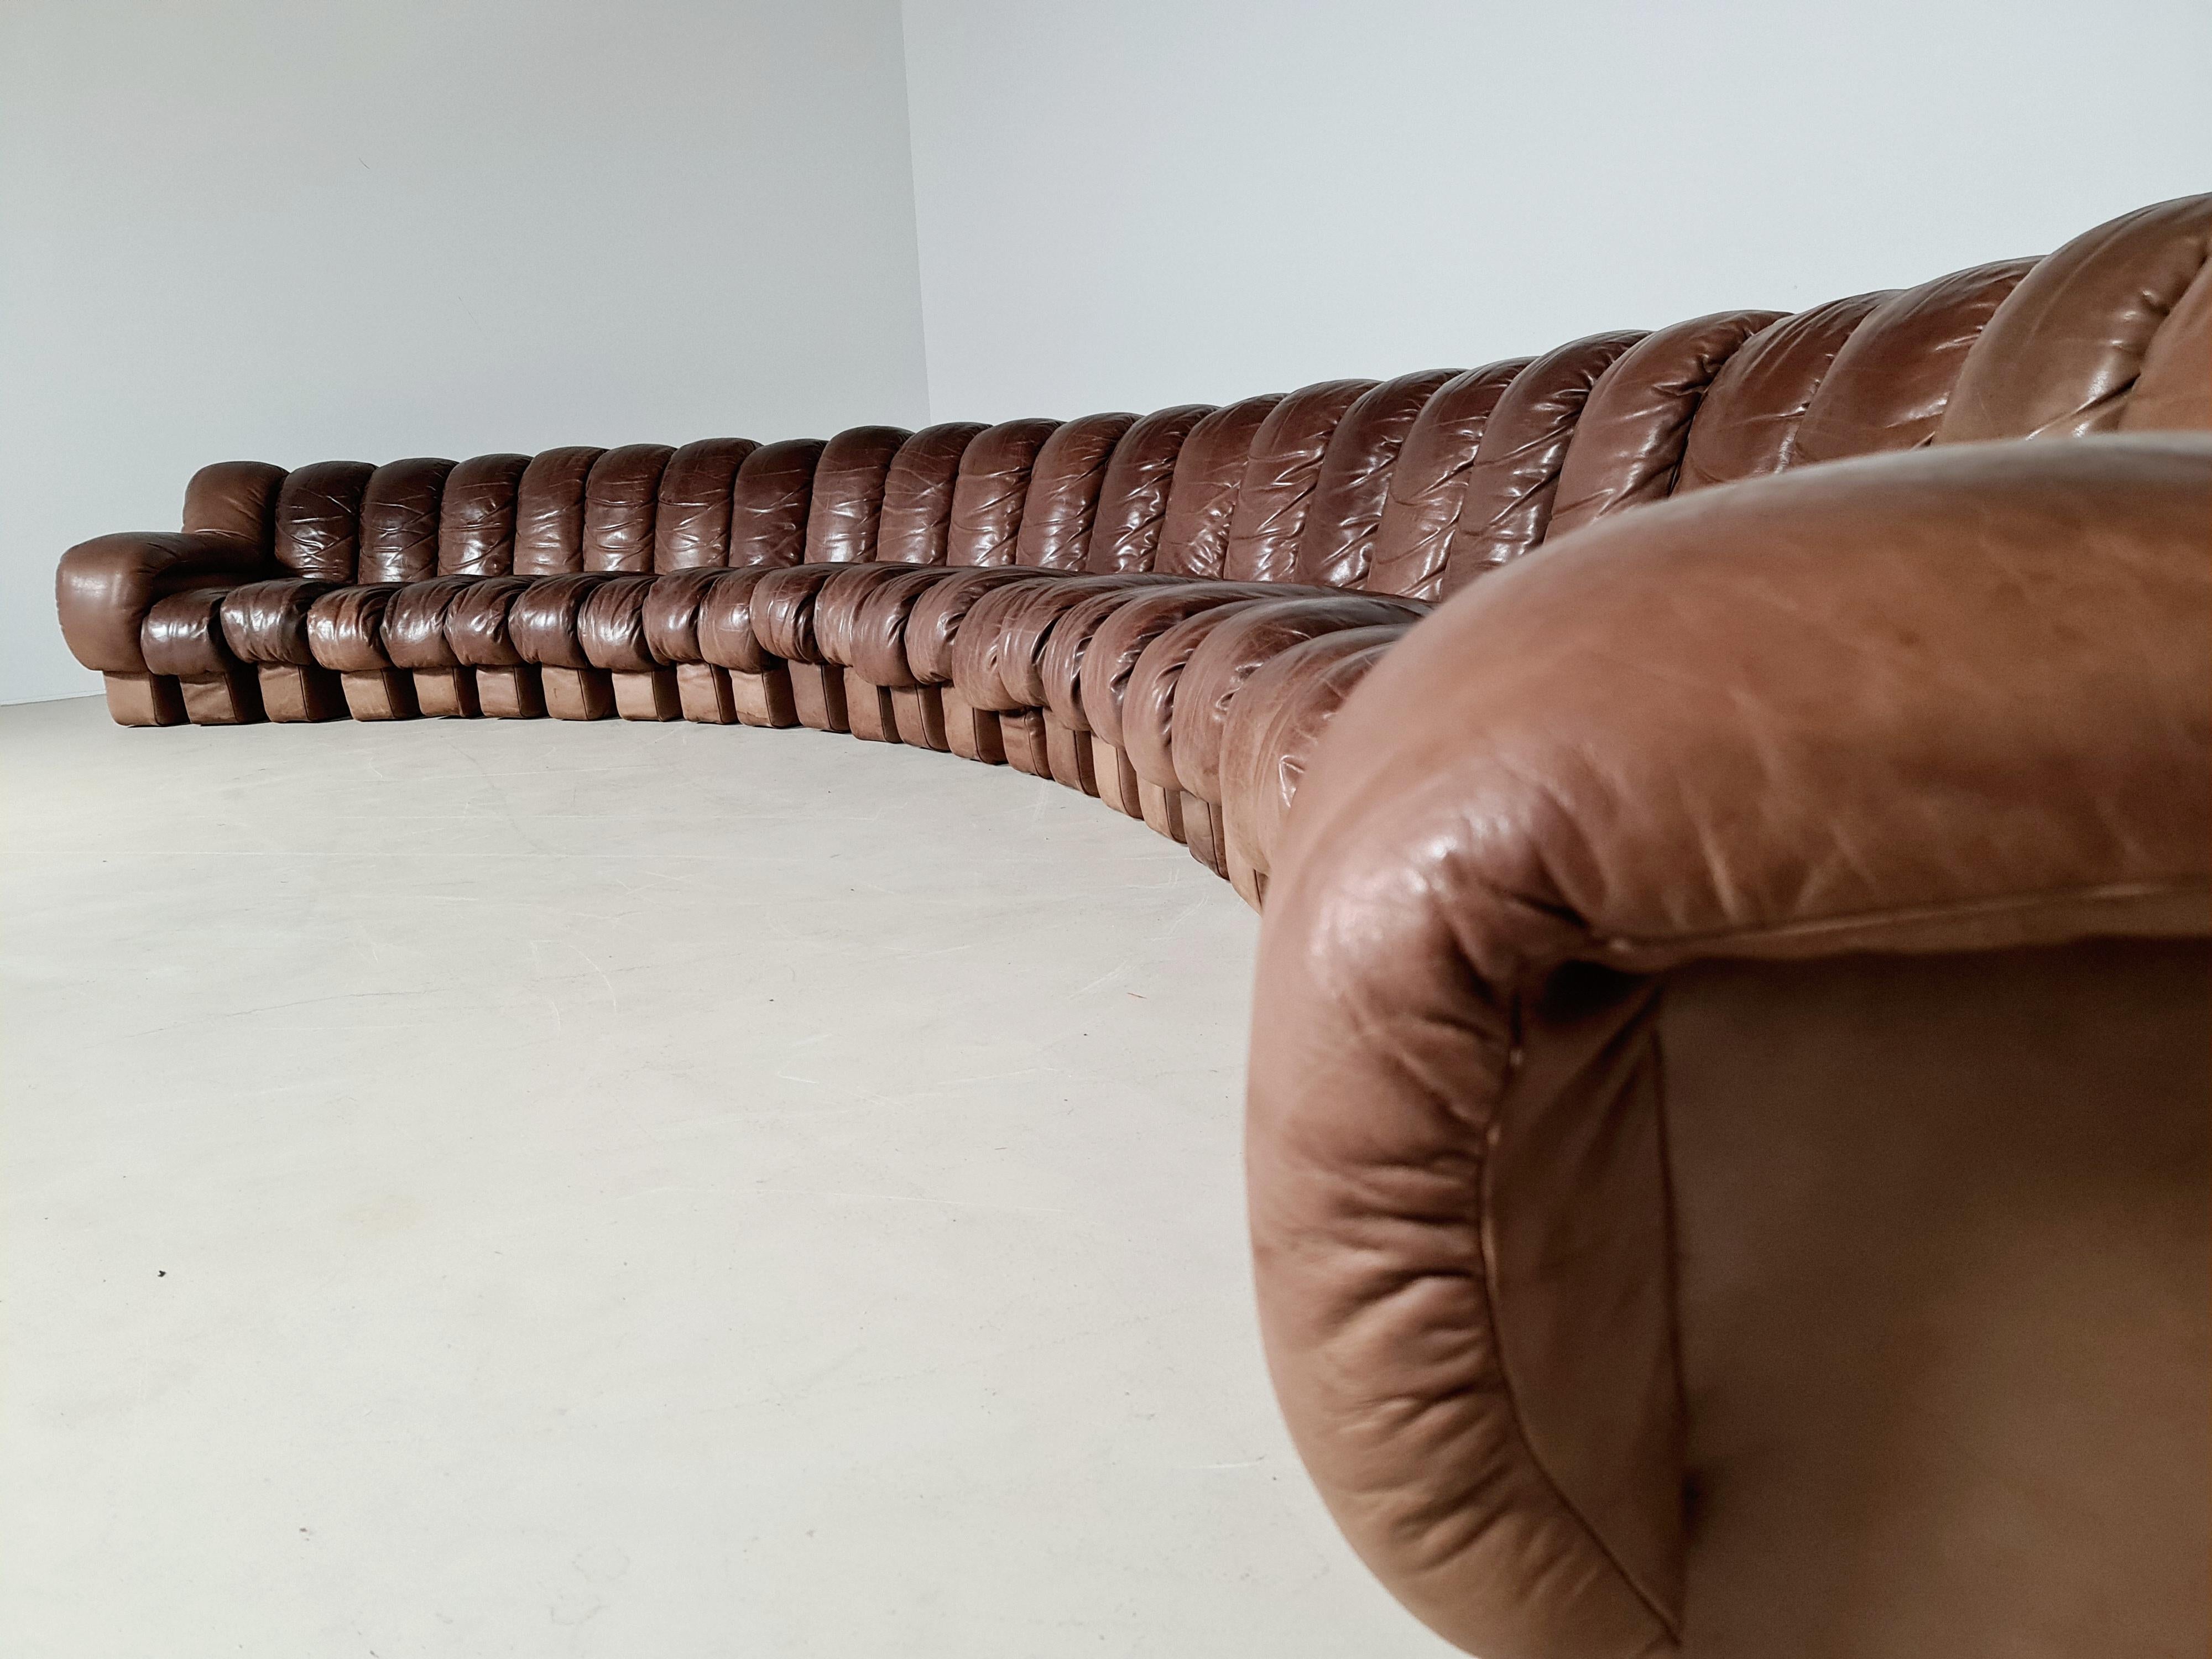 This huge De Sede sofa in full brown leather is designed by Ueli Bergere, Elenora Peduzzi-Riva, Heinz Ulrich and Klaus Vogt. This sectional sofa contains 26 seating pieces with two armrests. The pieces can be zipped together ensuring an endless